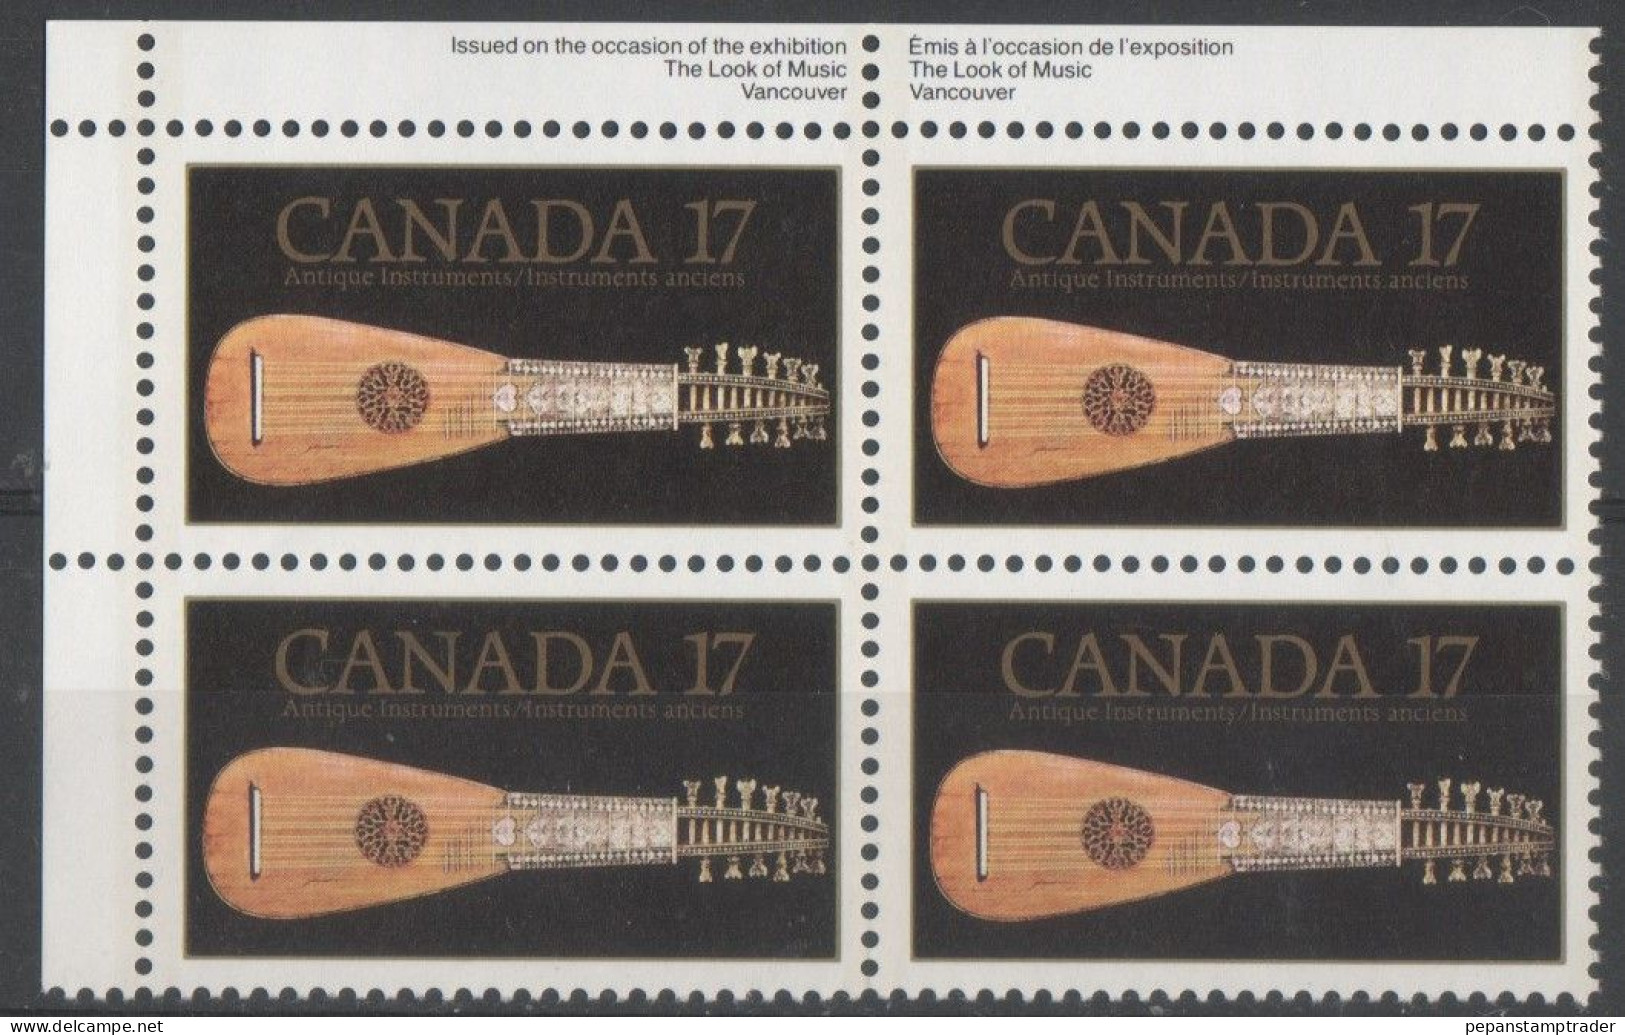 Canada - #878 - MNH Block  Of 4 - Plate Number & Inscriptions